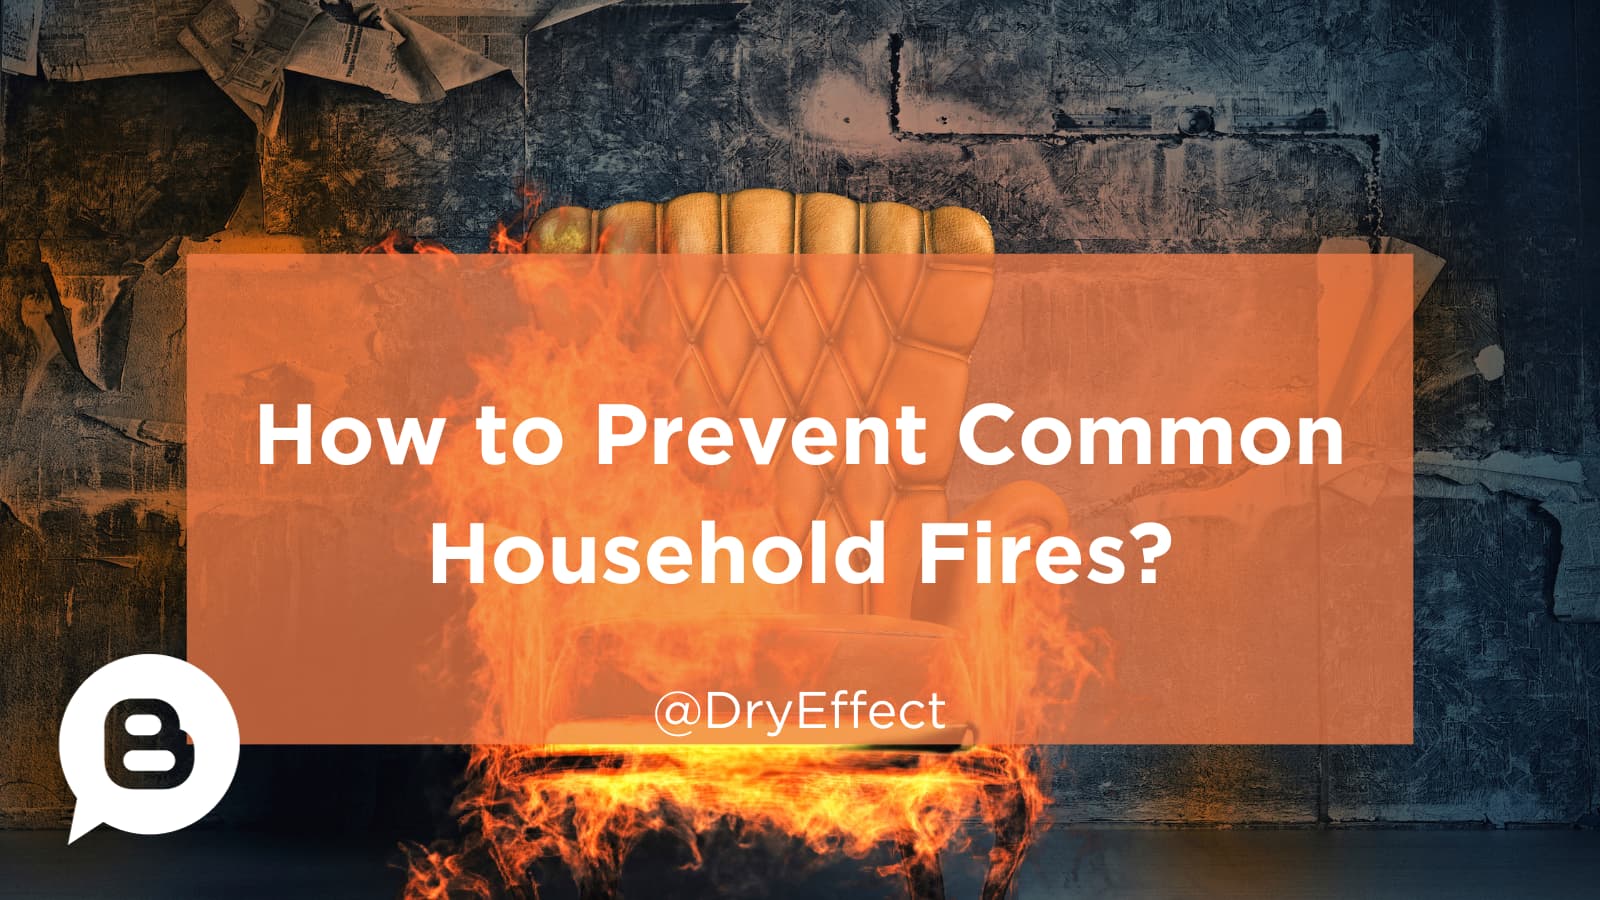 How to Prevent Common Household Fires?